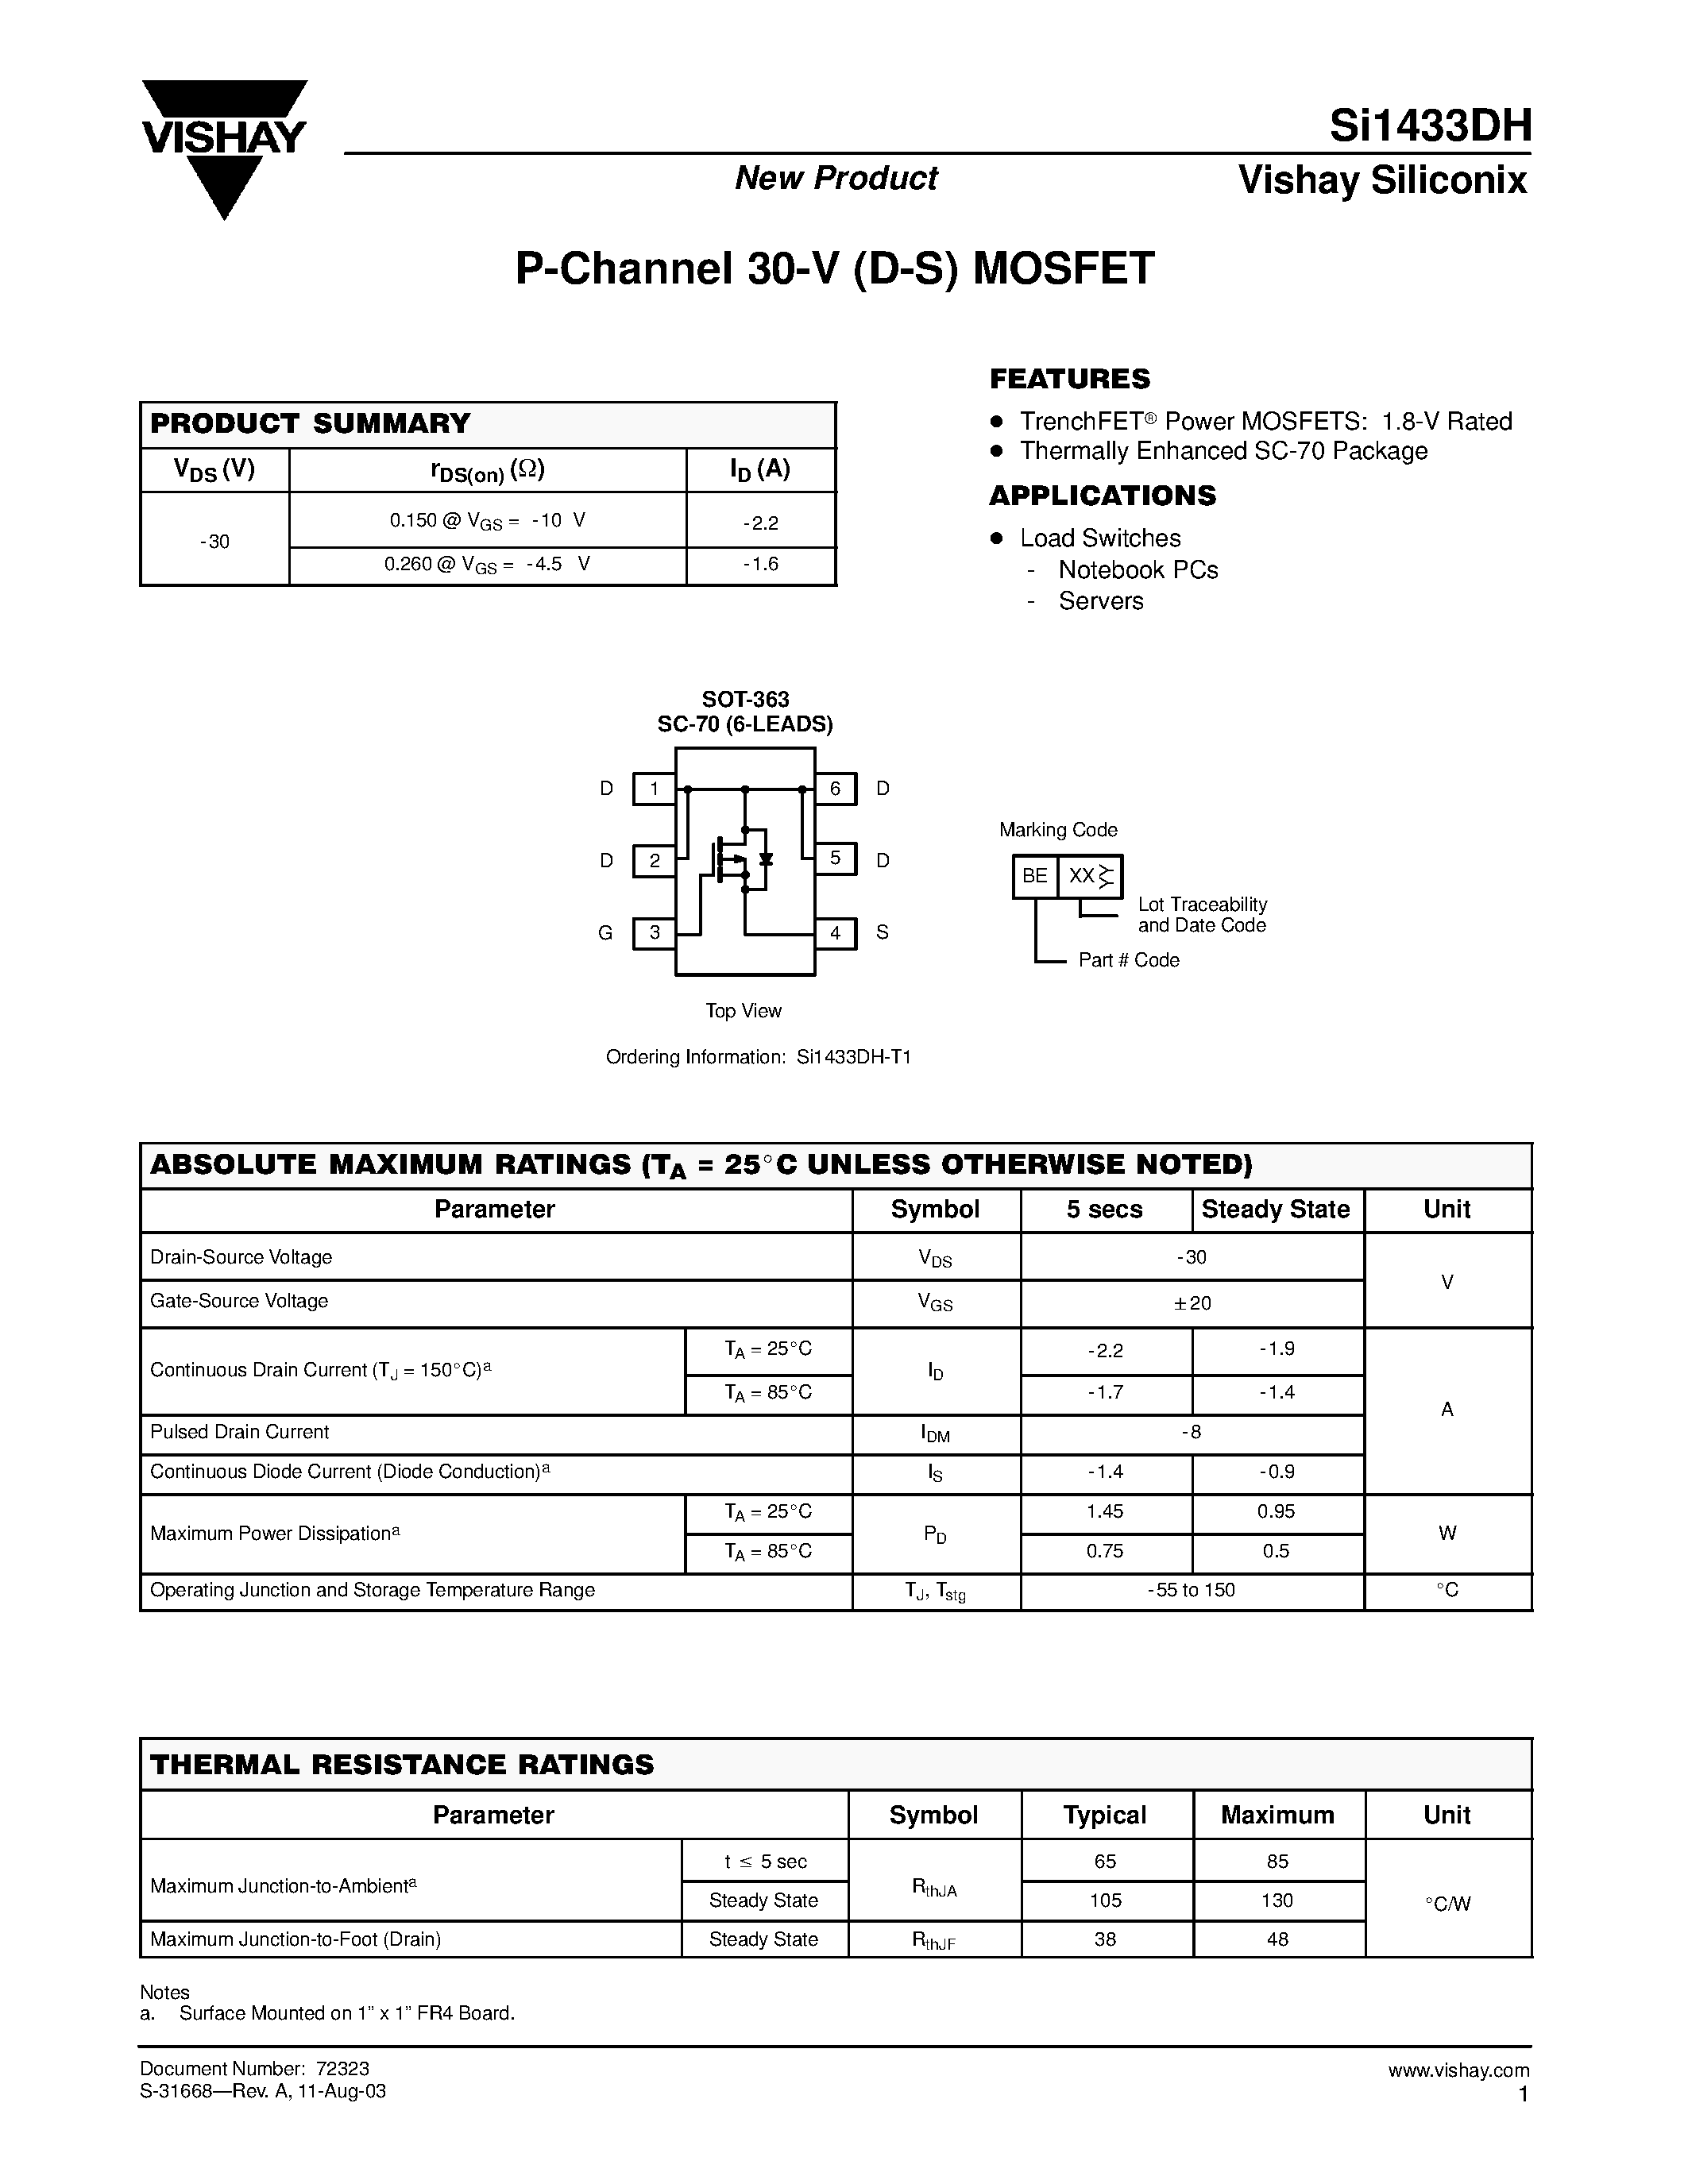 Datasheet SI1433DH-T1 - P-Channel 30-V (D-S) MOSFET page 1